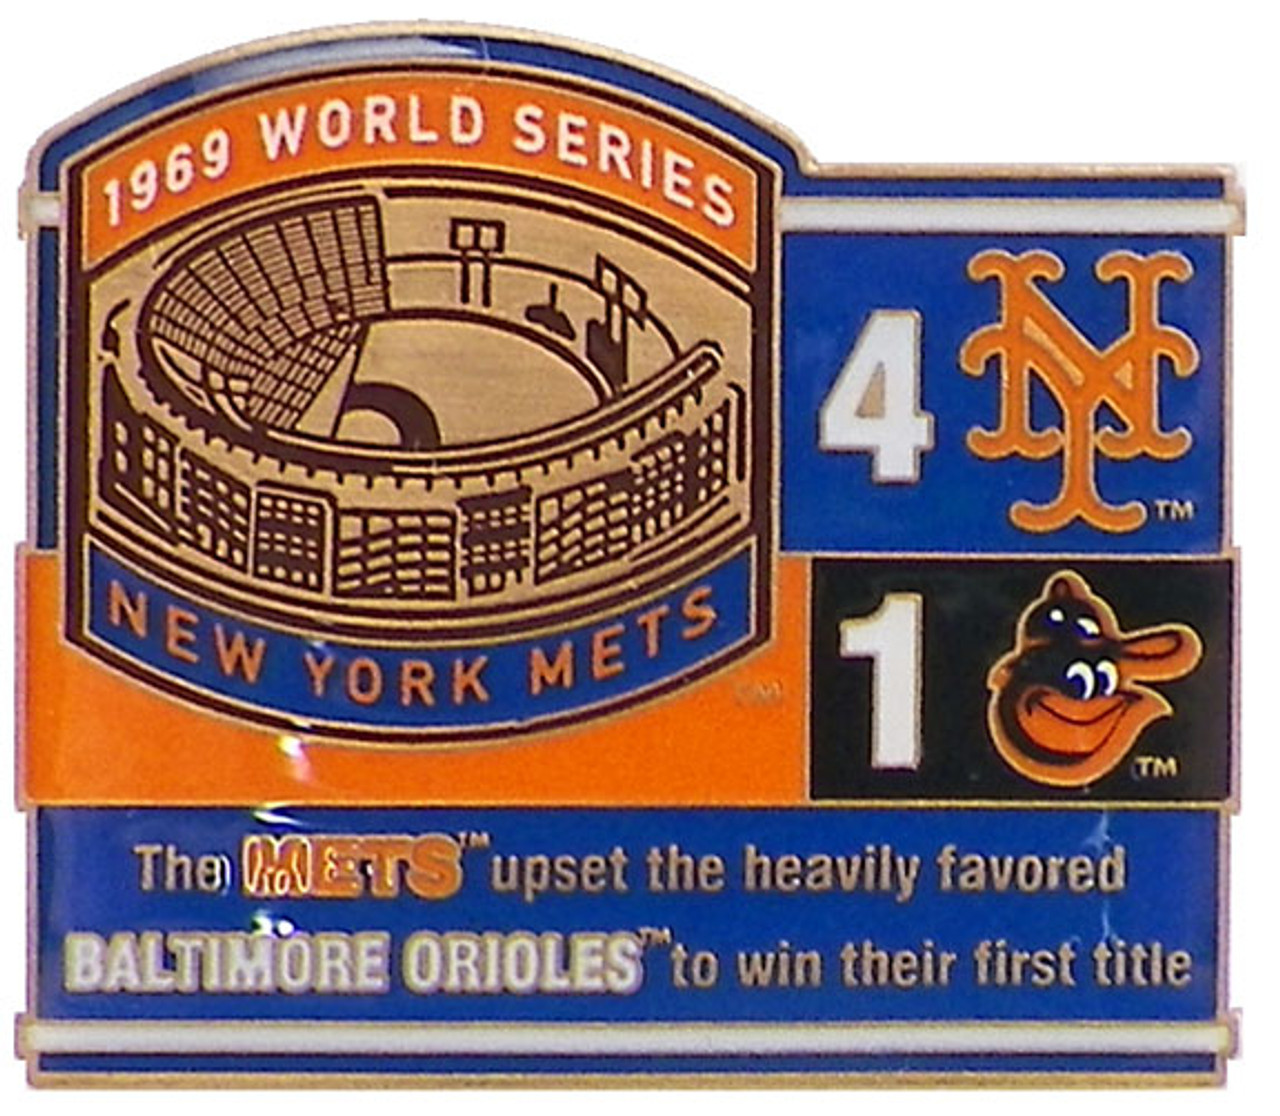 1986 World Series Commemorative Pin - Mets vs. Red Sox